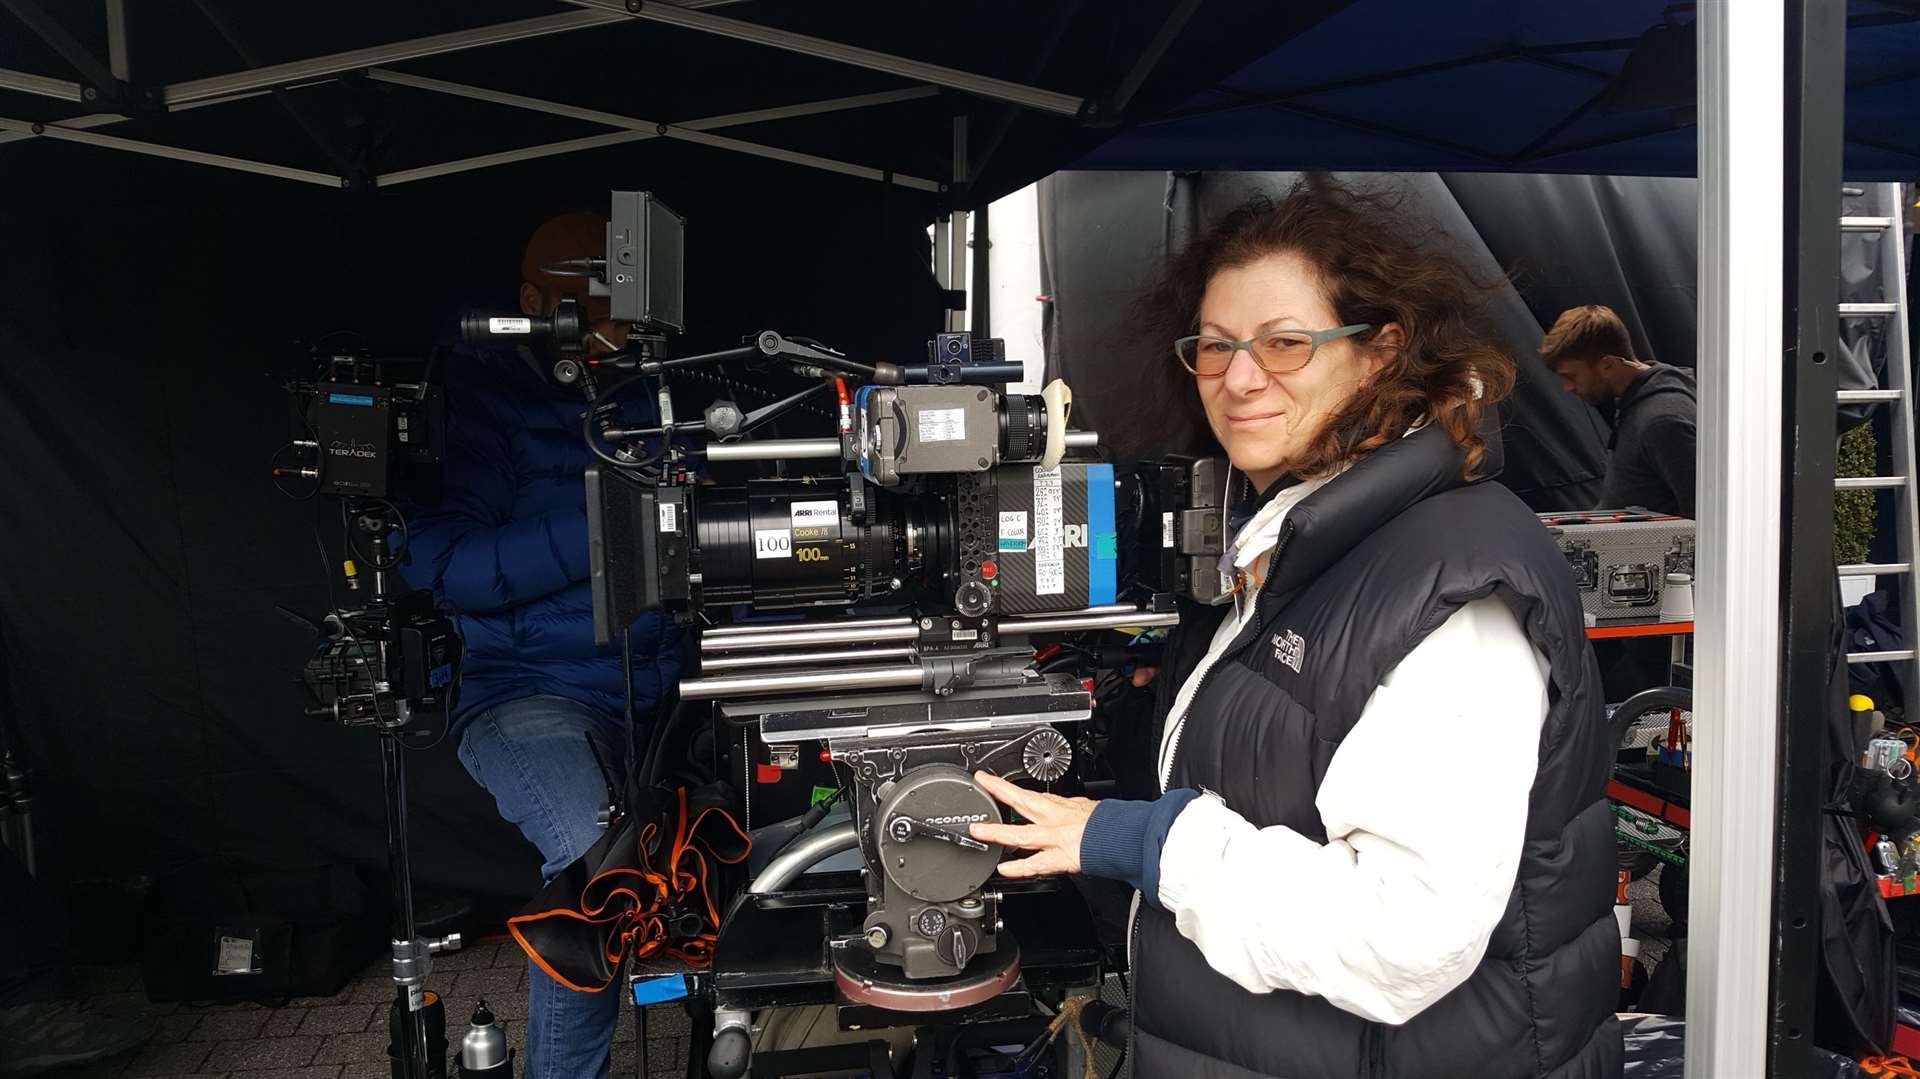 Tania's day job is as a director of photography in the film industry